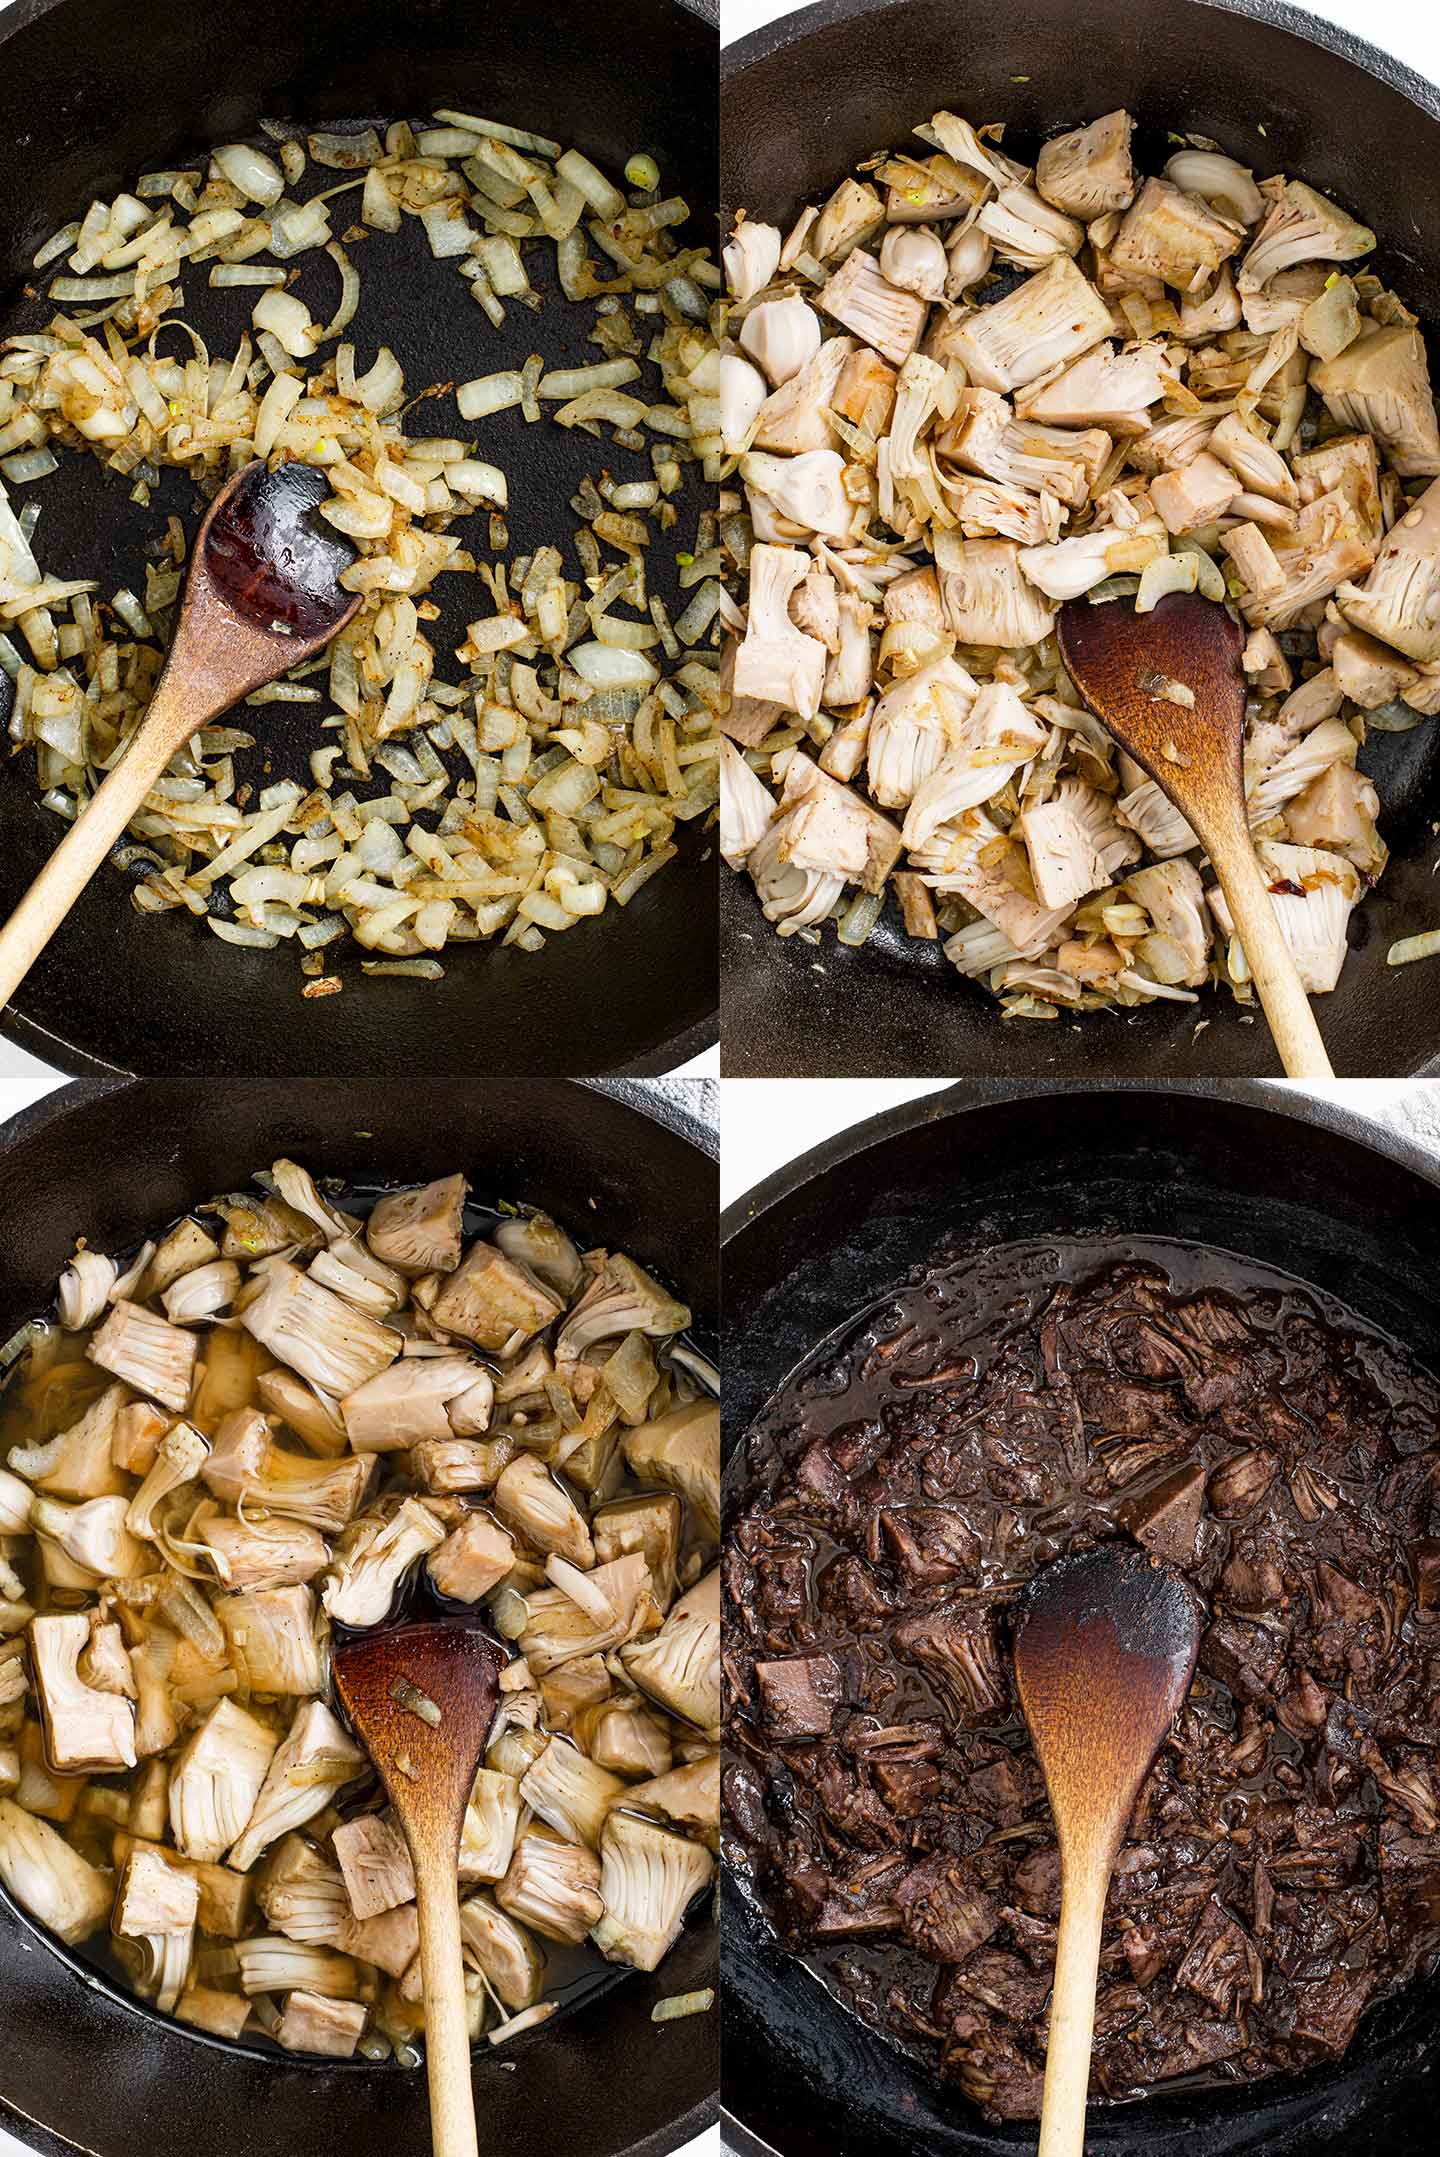 Grid of four process photographs. Sliced onion caramelizes in a cast iron dutch oven. Shredded jackfruit is added. Broth covers the jackfruit. Finally, the fesenjan is complete and the jackfruit has turned a deep brown colour resembling stewed beef.